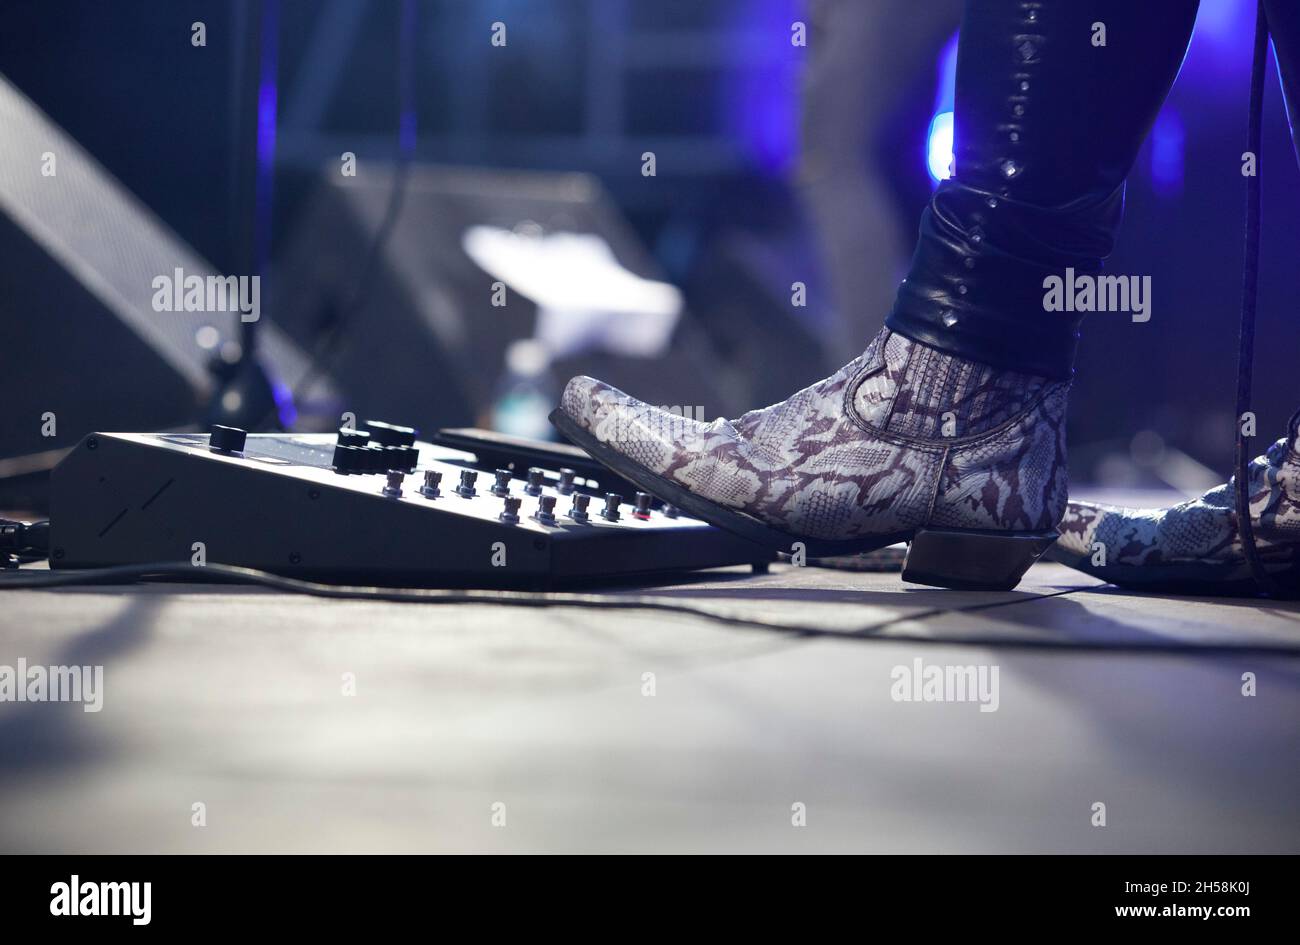 Rock guitarist playing with pedalboard. Hard rock musicians performing. Stock Photo